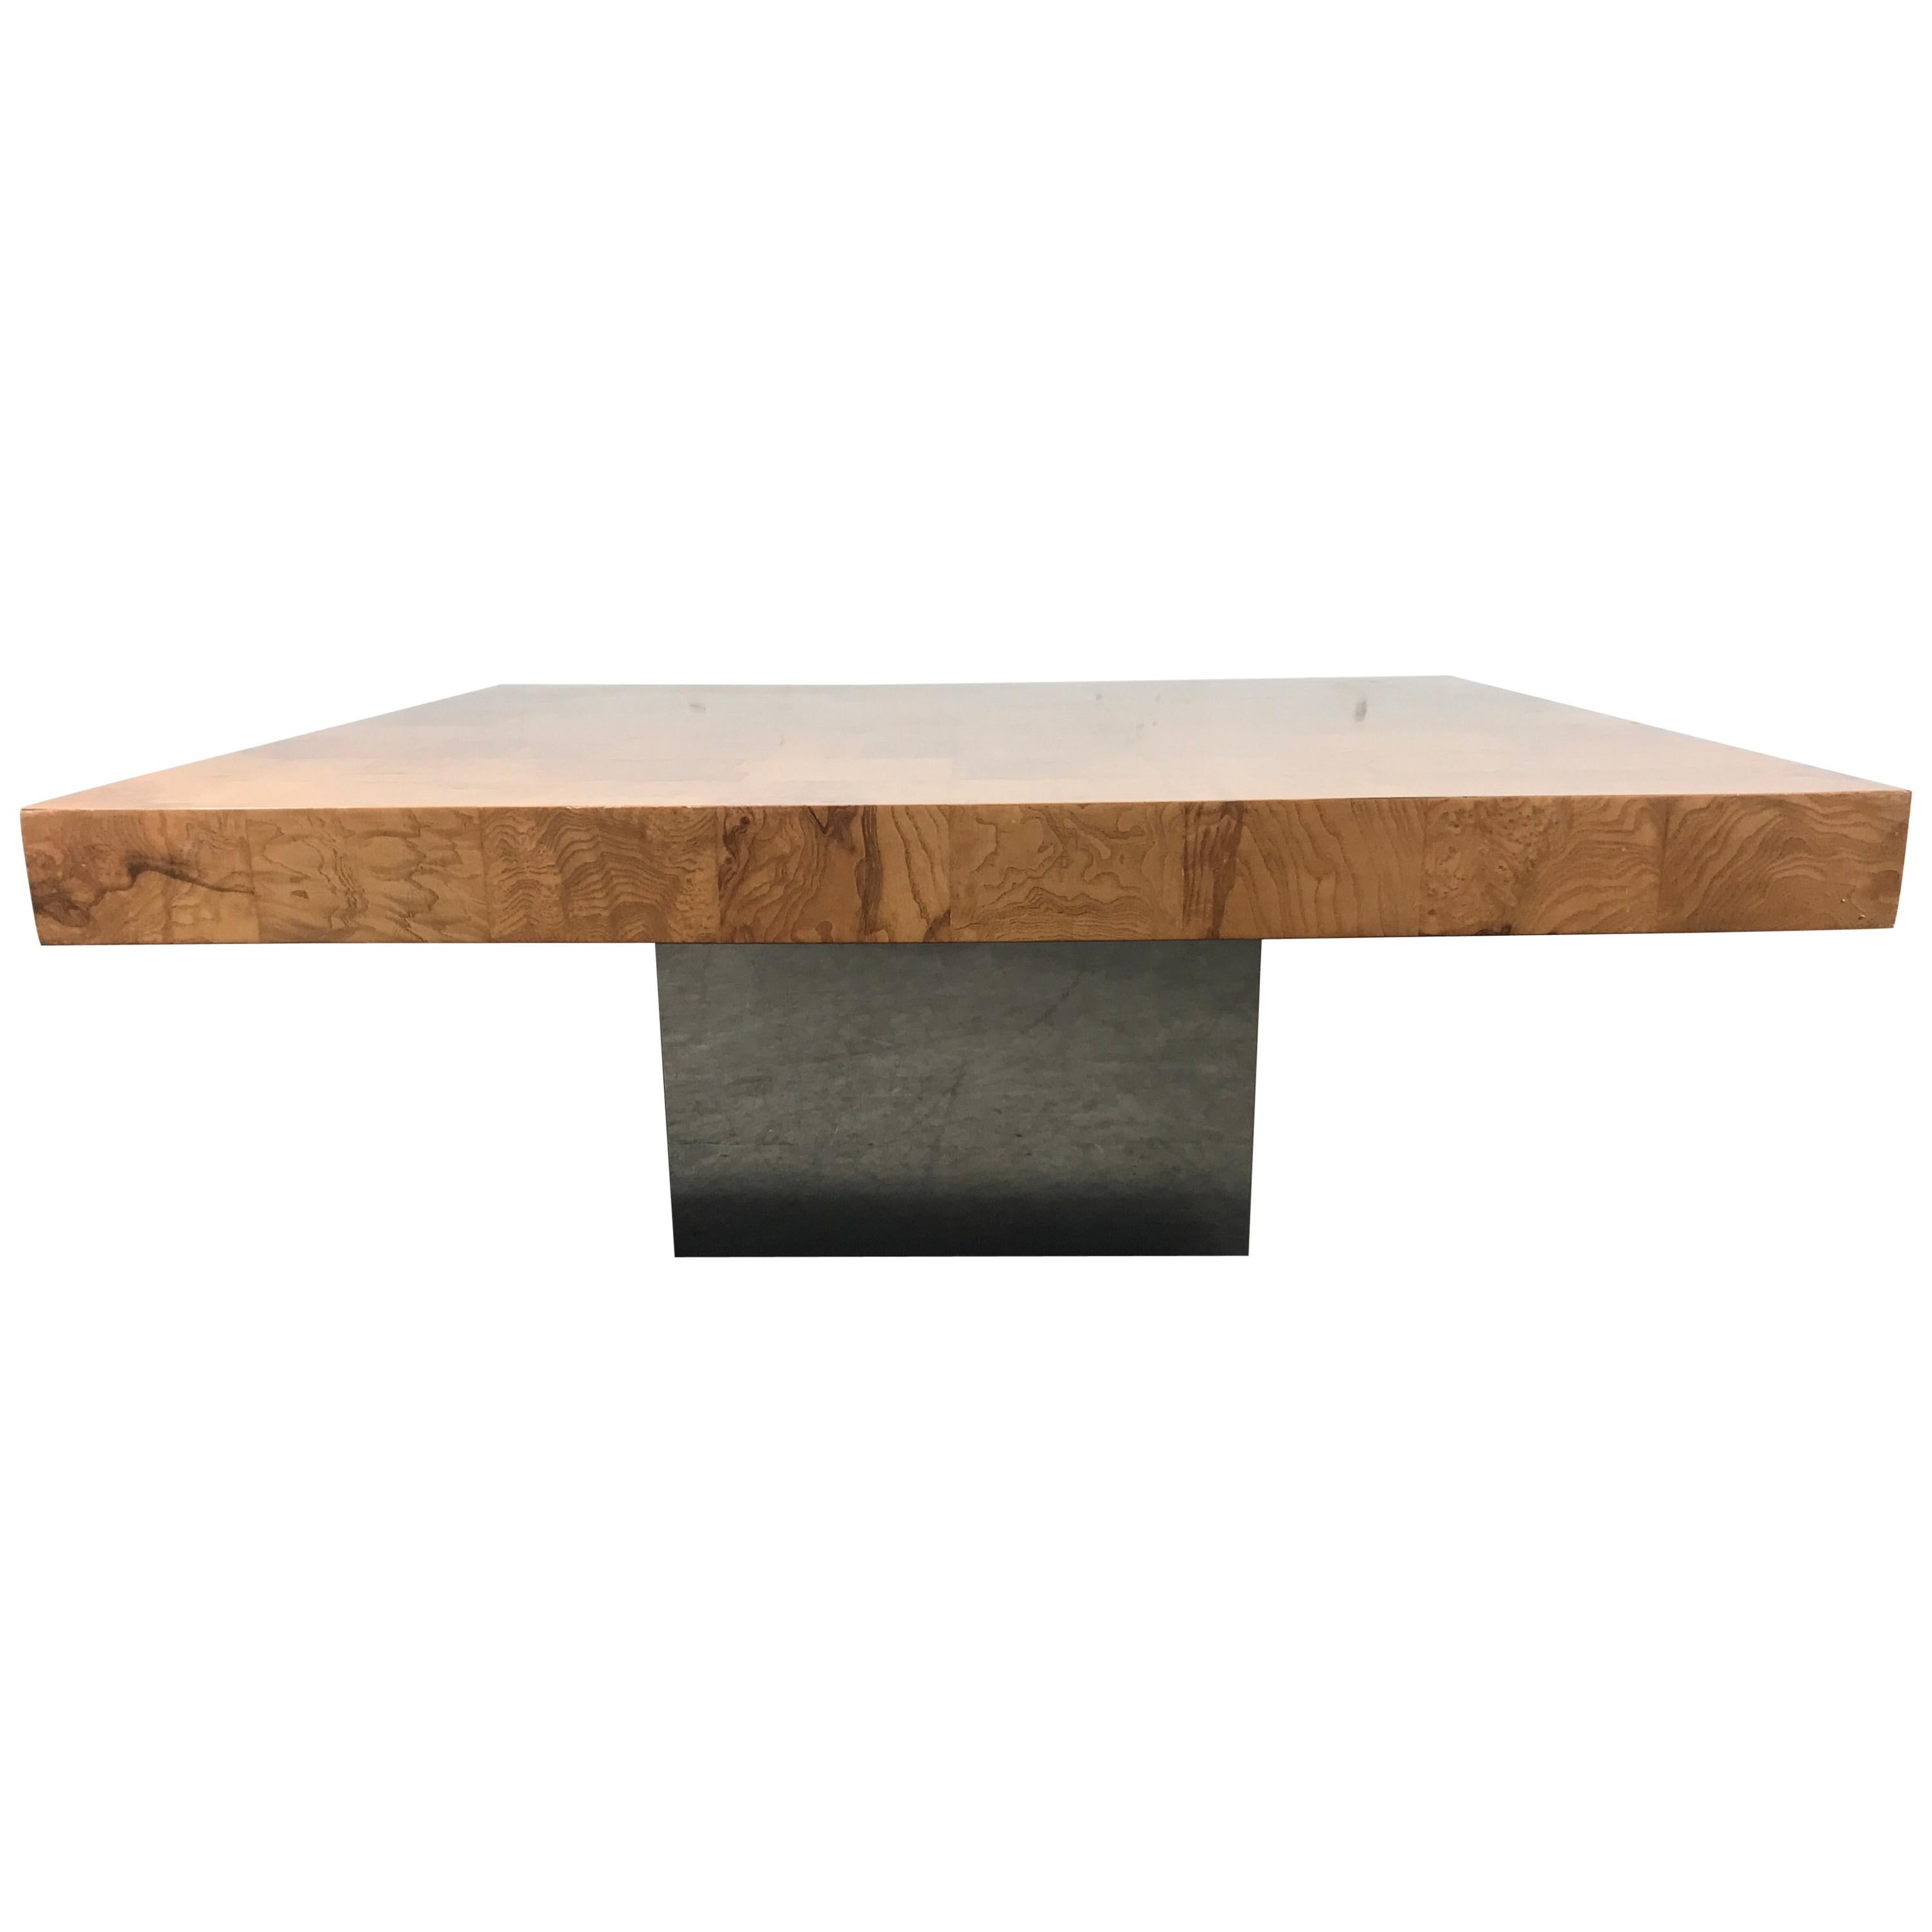 Classic Burl Wood and Chrome Cocktail Coffee Table Designed by Milo Baughman